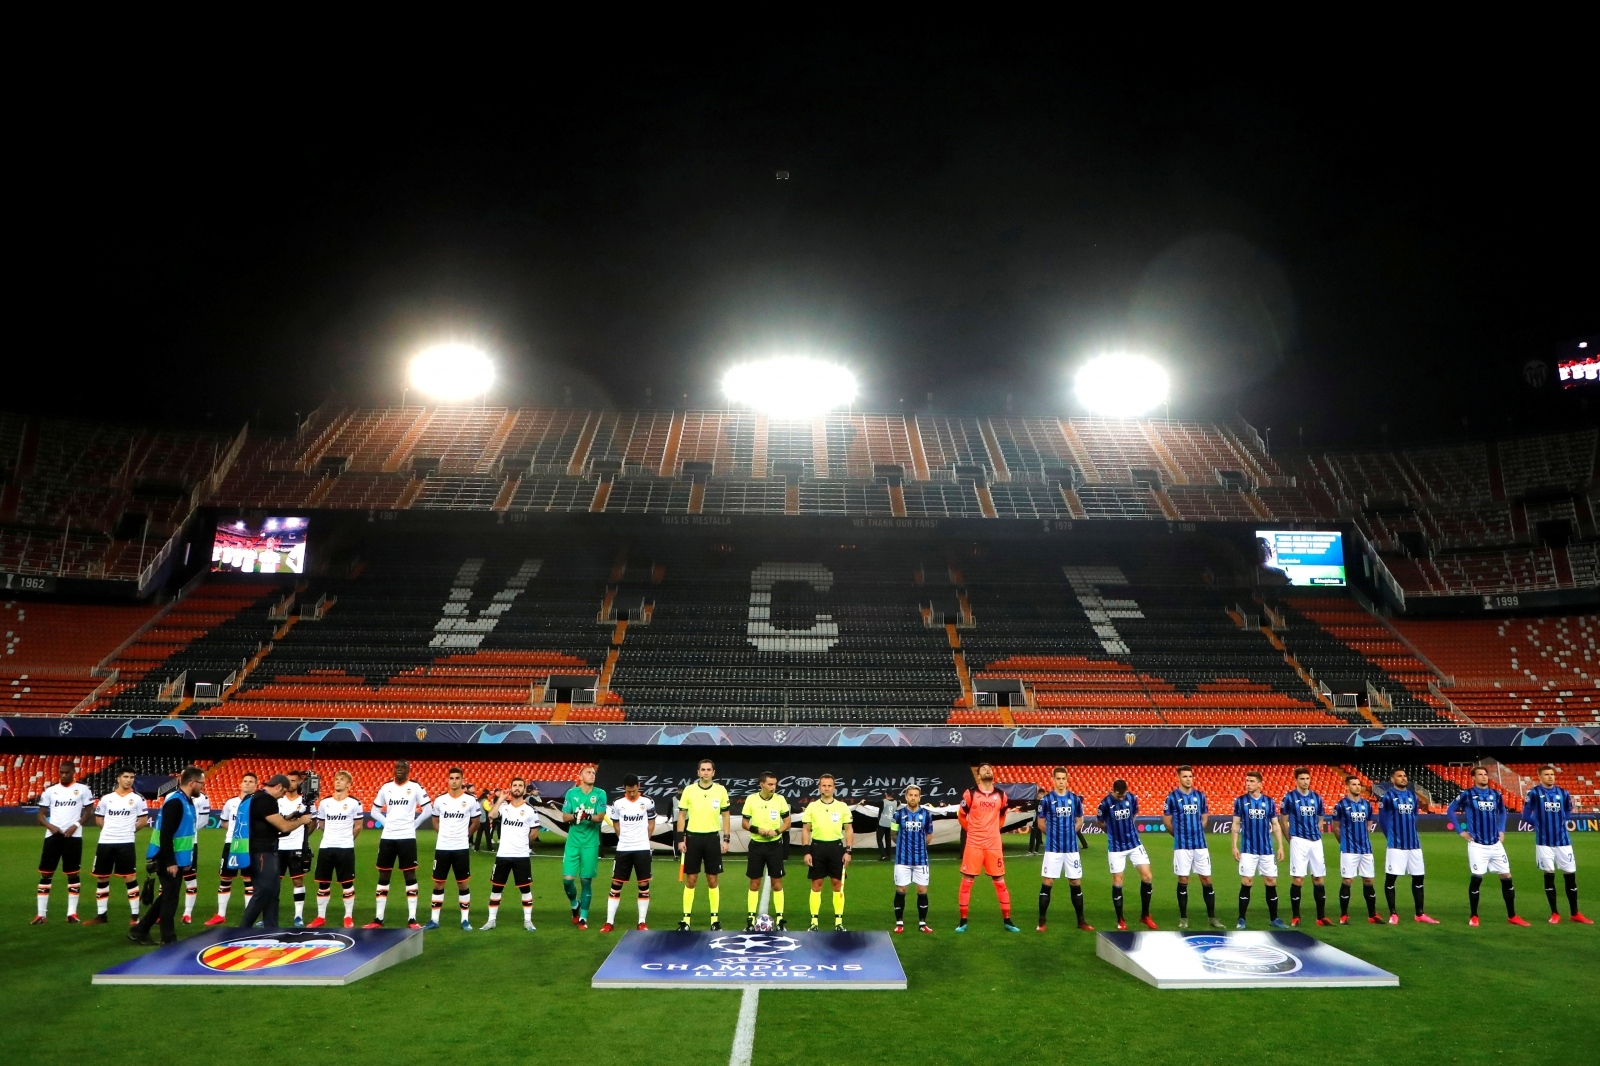 Champions League - Round of 16 Second Leg - Valencia v Atalanta Soccer Football - Champions League - Round of 16 Second Leg - Valencia v Atalanta - Mestalla, Valencia, Spain - March 10, 2020  General view as the players line up before the match is played behind closed doors as the number of coronavirus cases grow around the world  Lazaro Dela Pena for UEFA/Handout via REUTERS ATTENTION EDITORS - THIS IMAGE HAS BEEN SUPPLIED BY A THIRD PARTY.     TPX IMAGES OF THE DAY Lazaro Dela Pena for UEFA